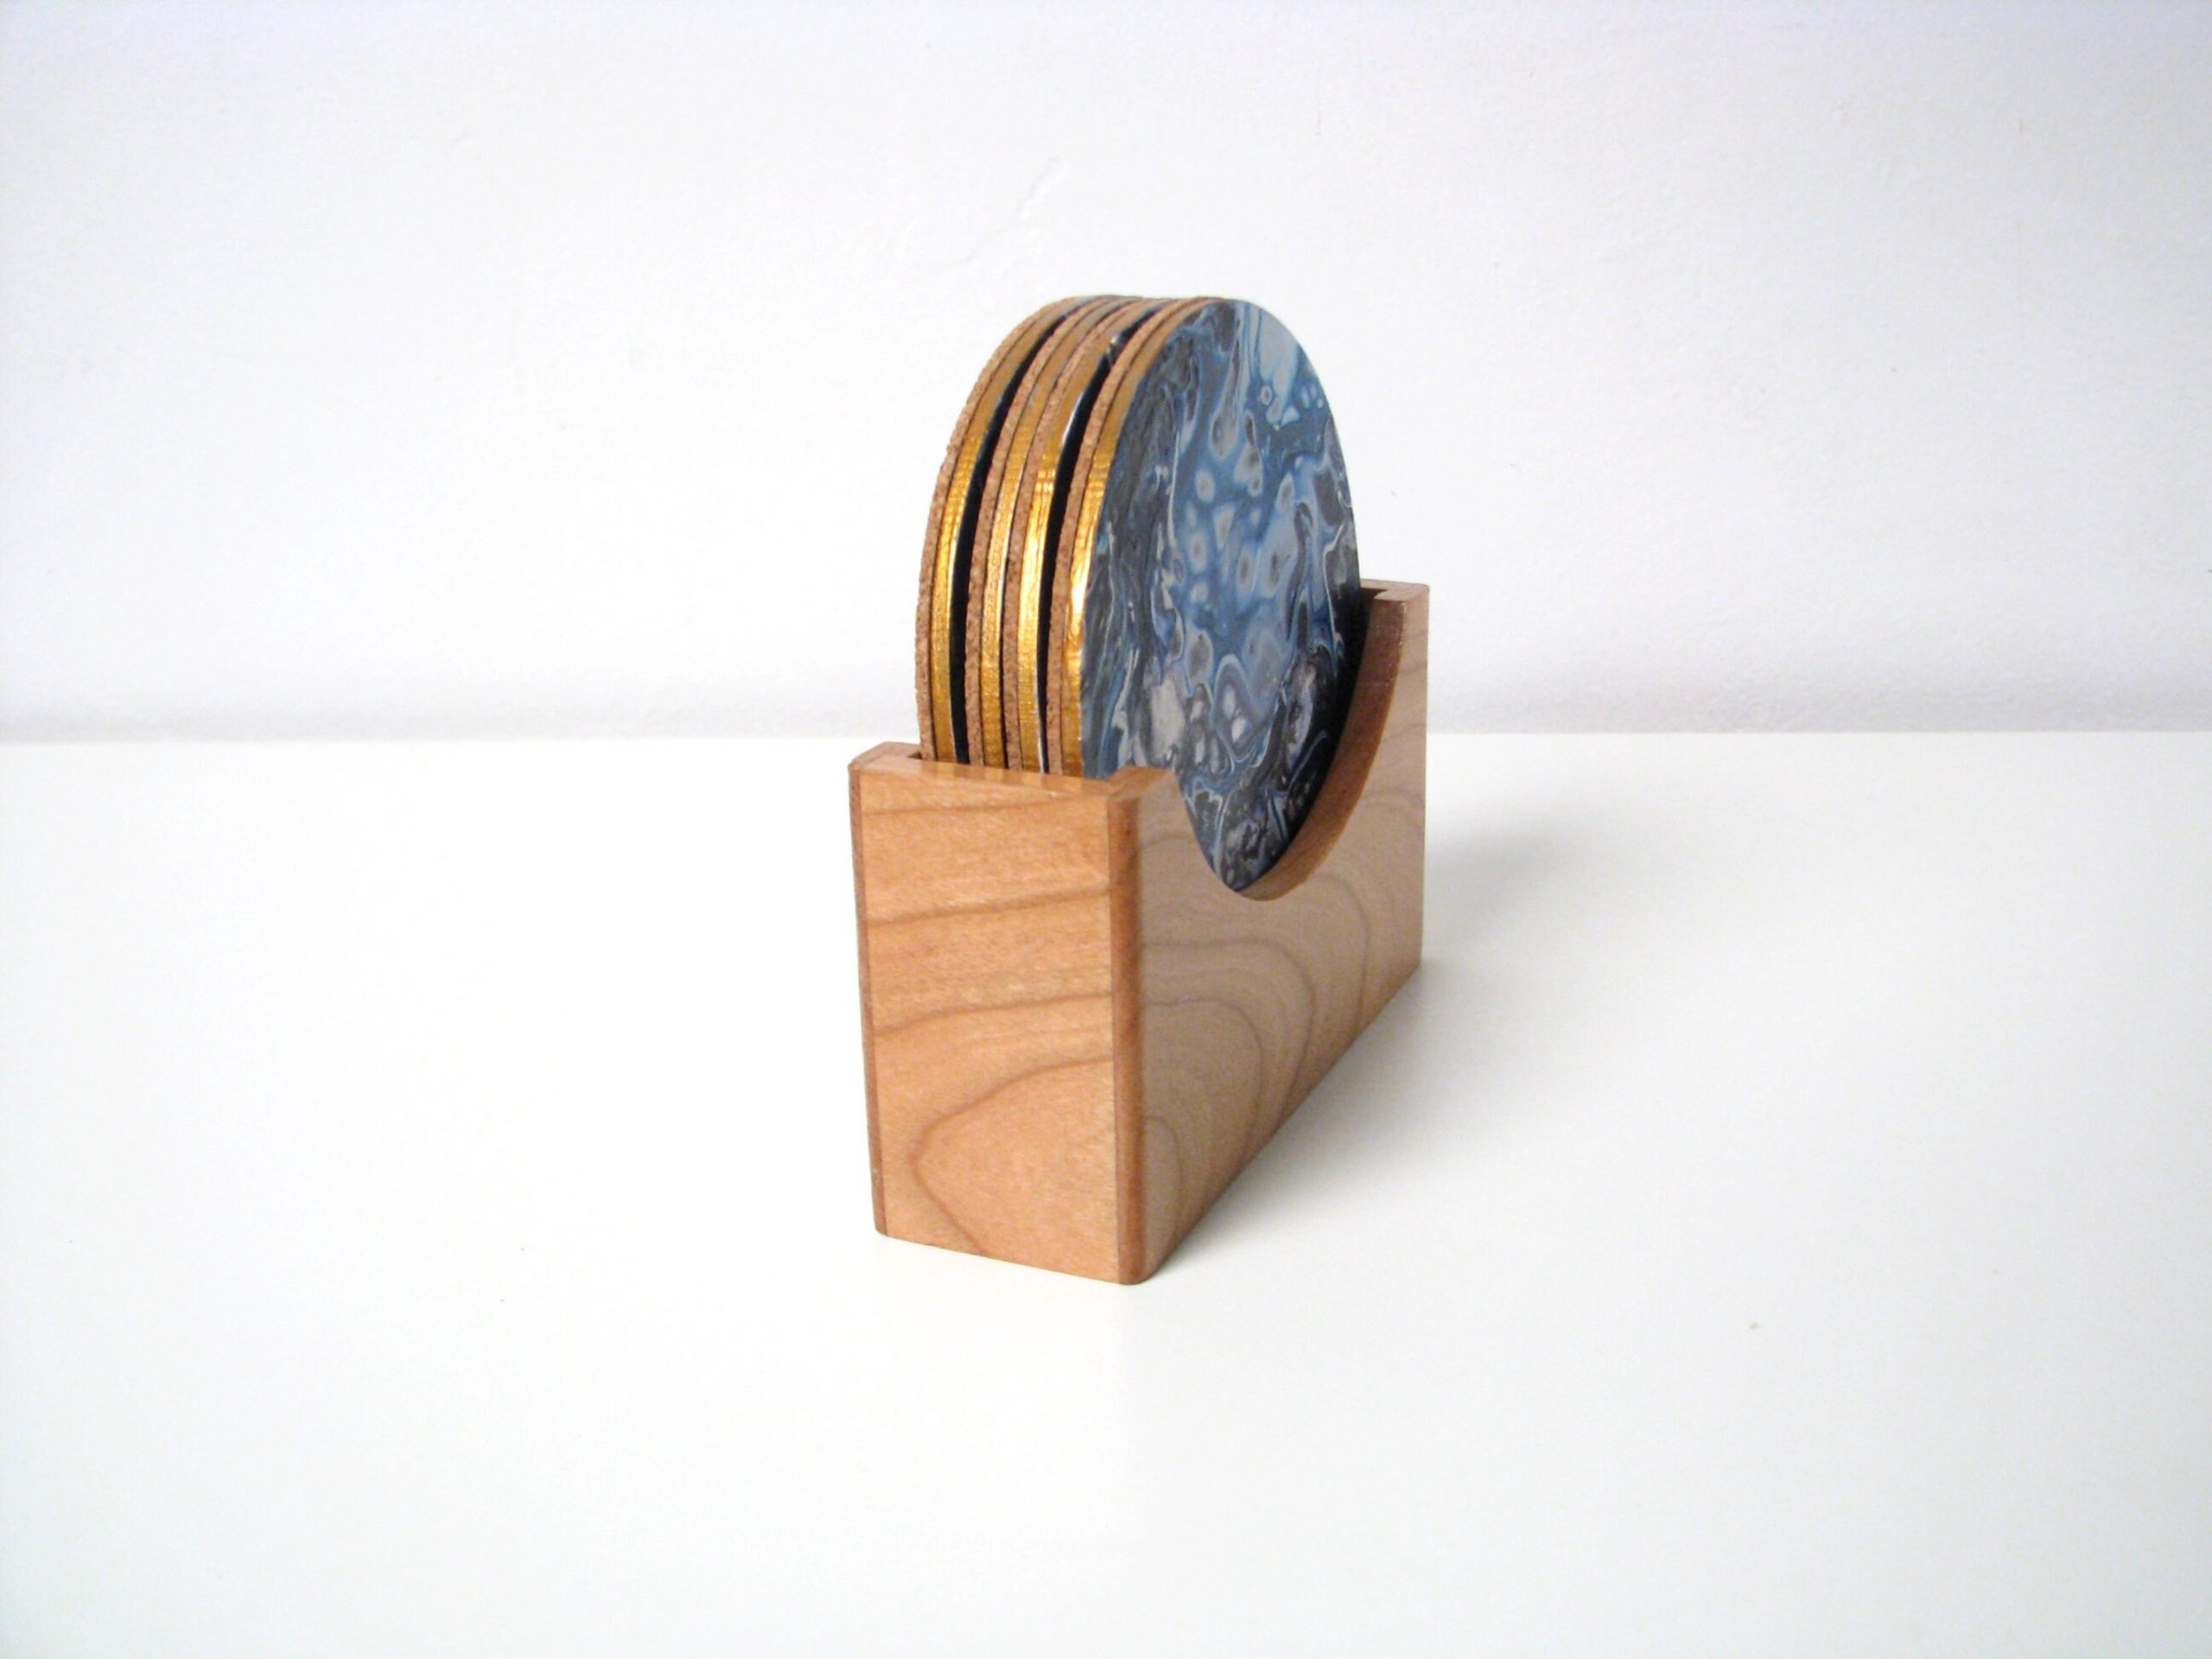 Flat Wooden Coaster Holder, Fits 4″ Round Coasters – Kahoy Crafts Co